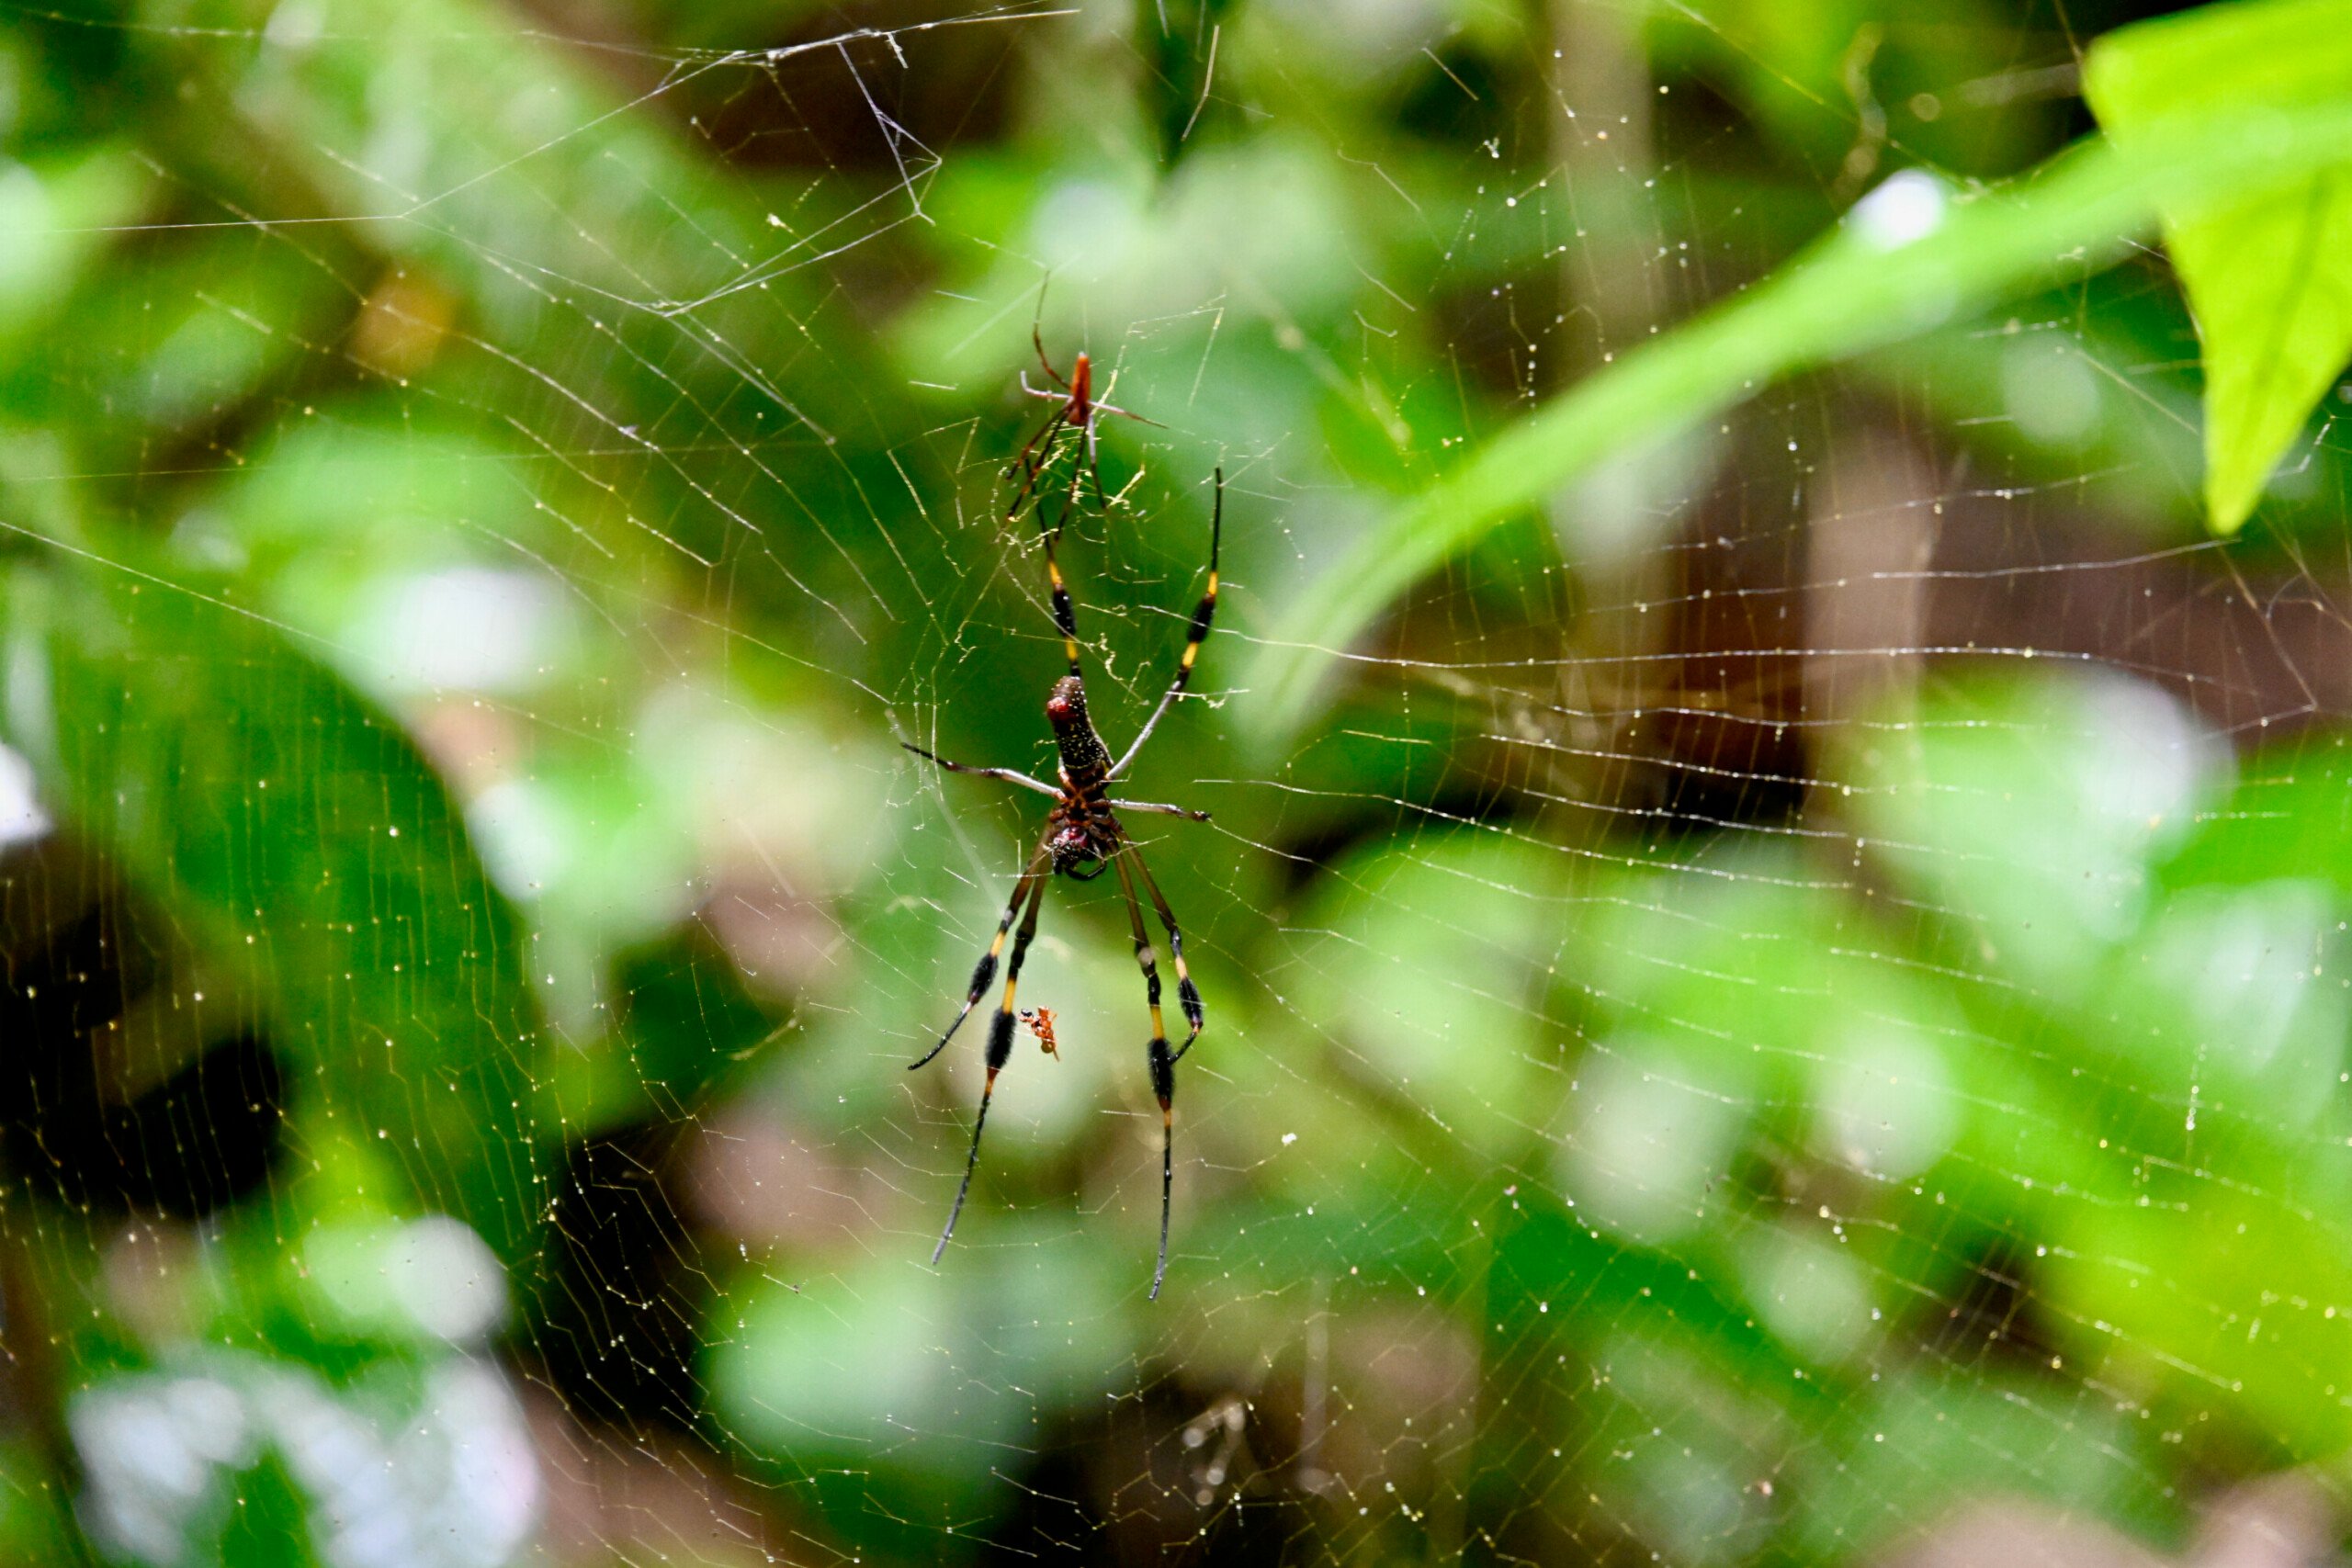 A Golden Orb-Weaver spider suspended in its intricate web against a blurred green forest backdrop in Carara National Park.